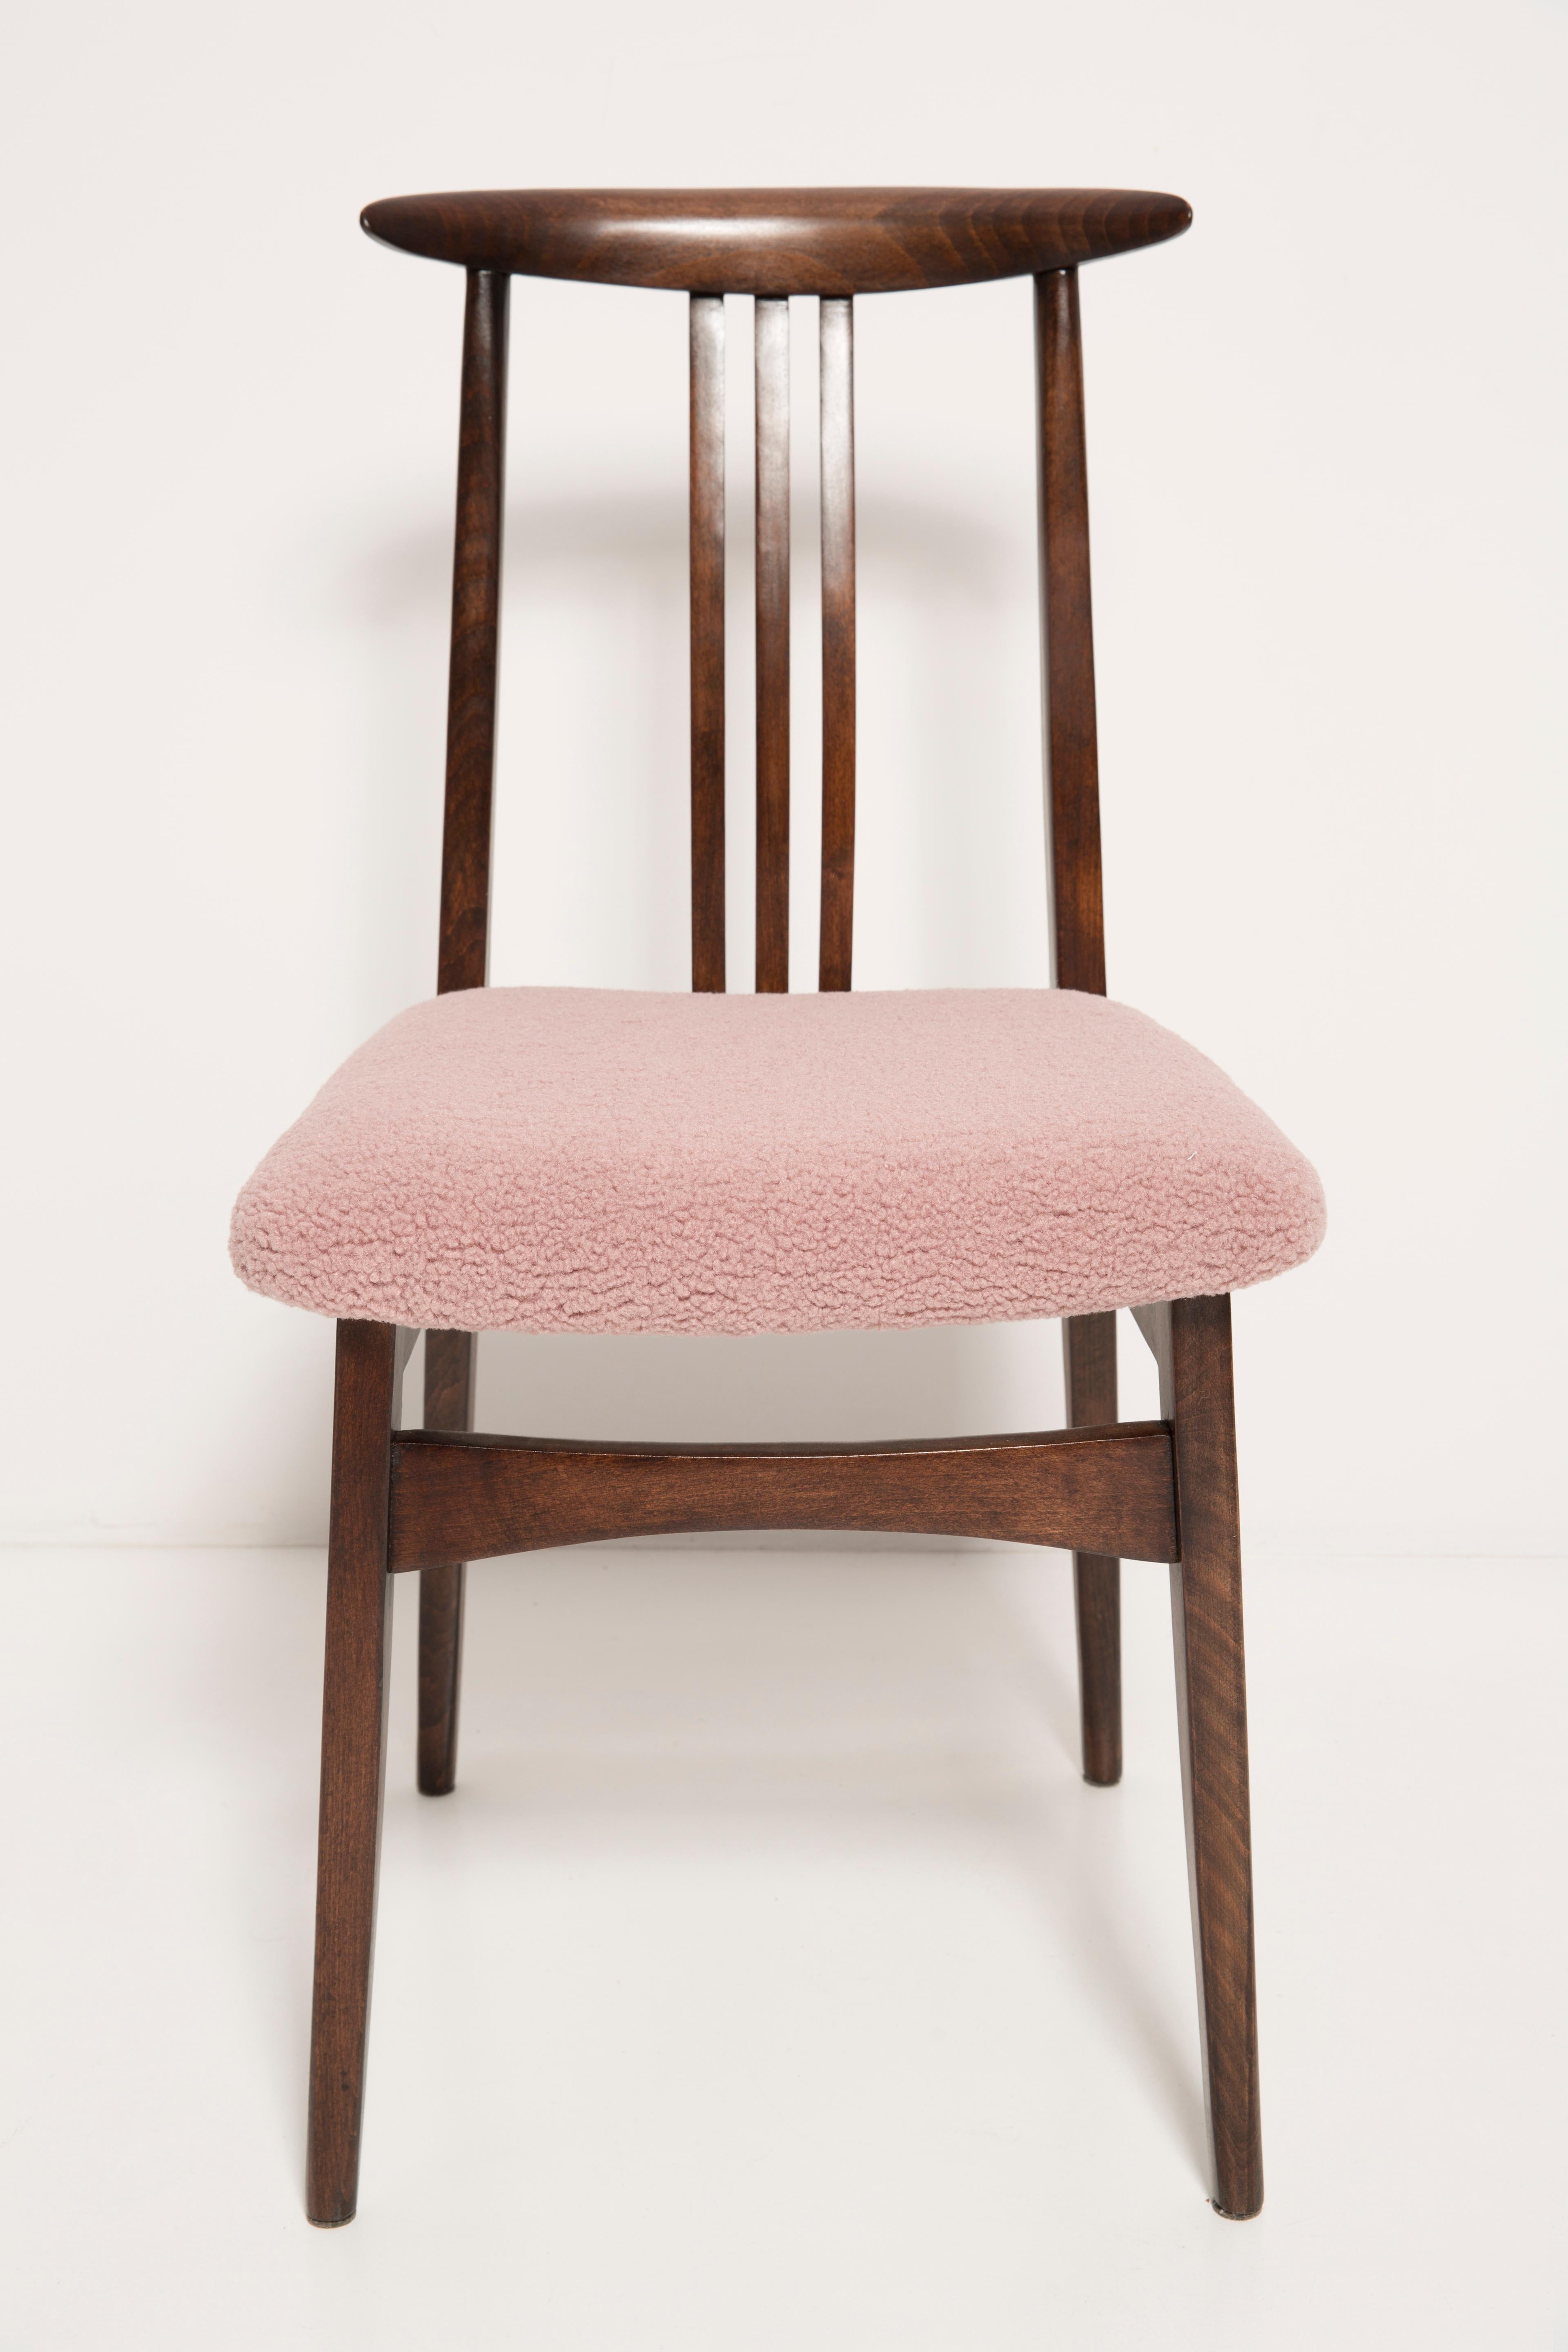 Hand-Crafted Mid-Century Modern Pink Boucle Chair, Designed by M. Zielinski, Europe, 1960s For Sale